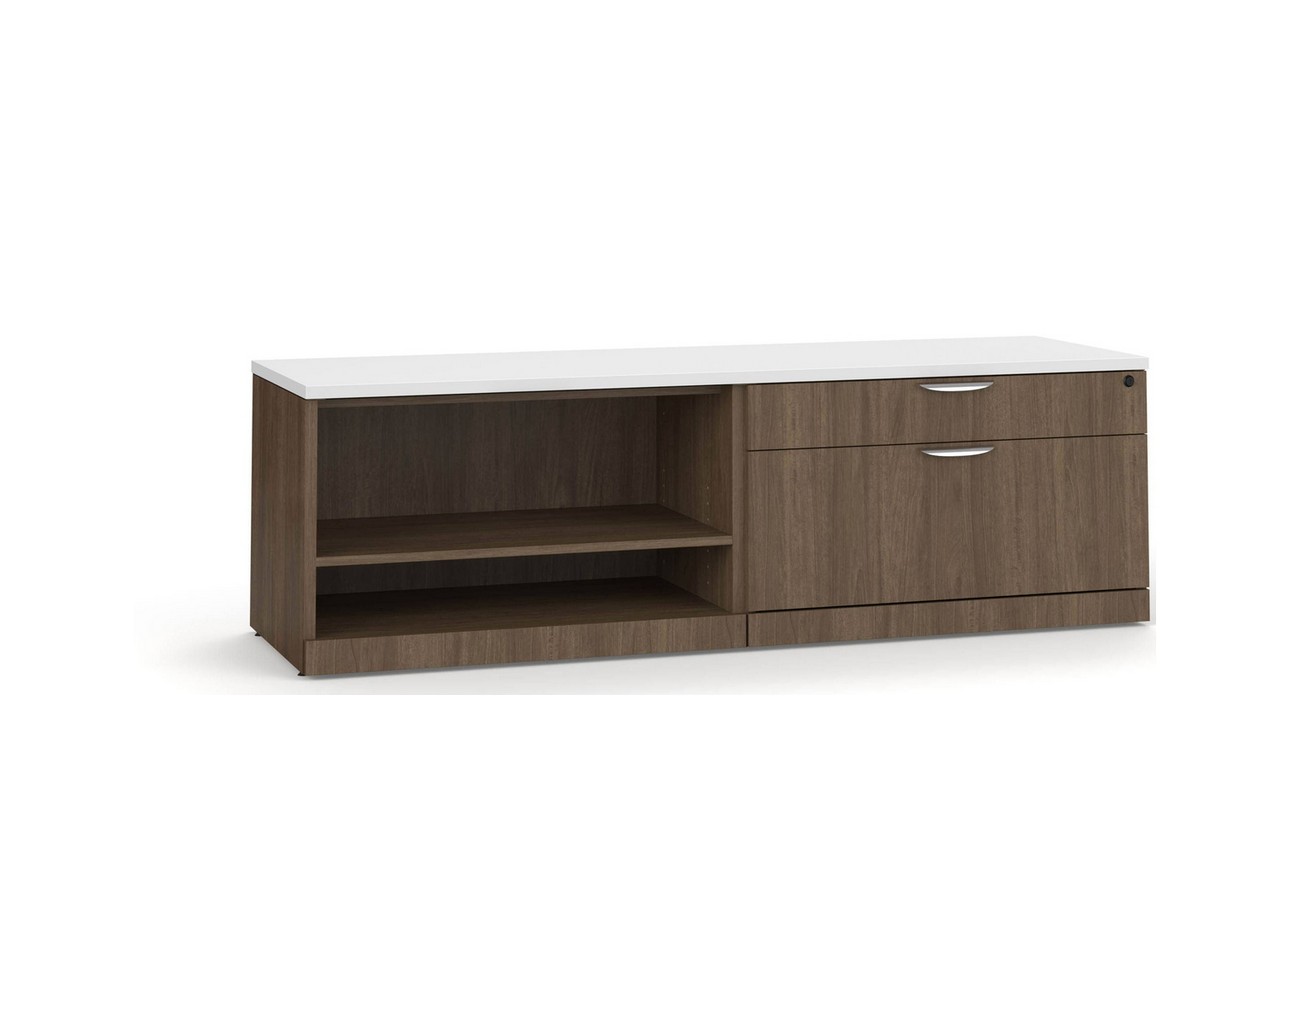 Elements Storage Cabinet and Bookshelf Credenza – MW Base and WHT Top